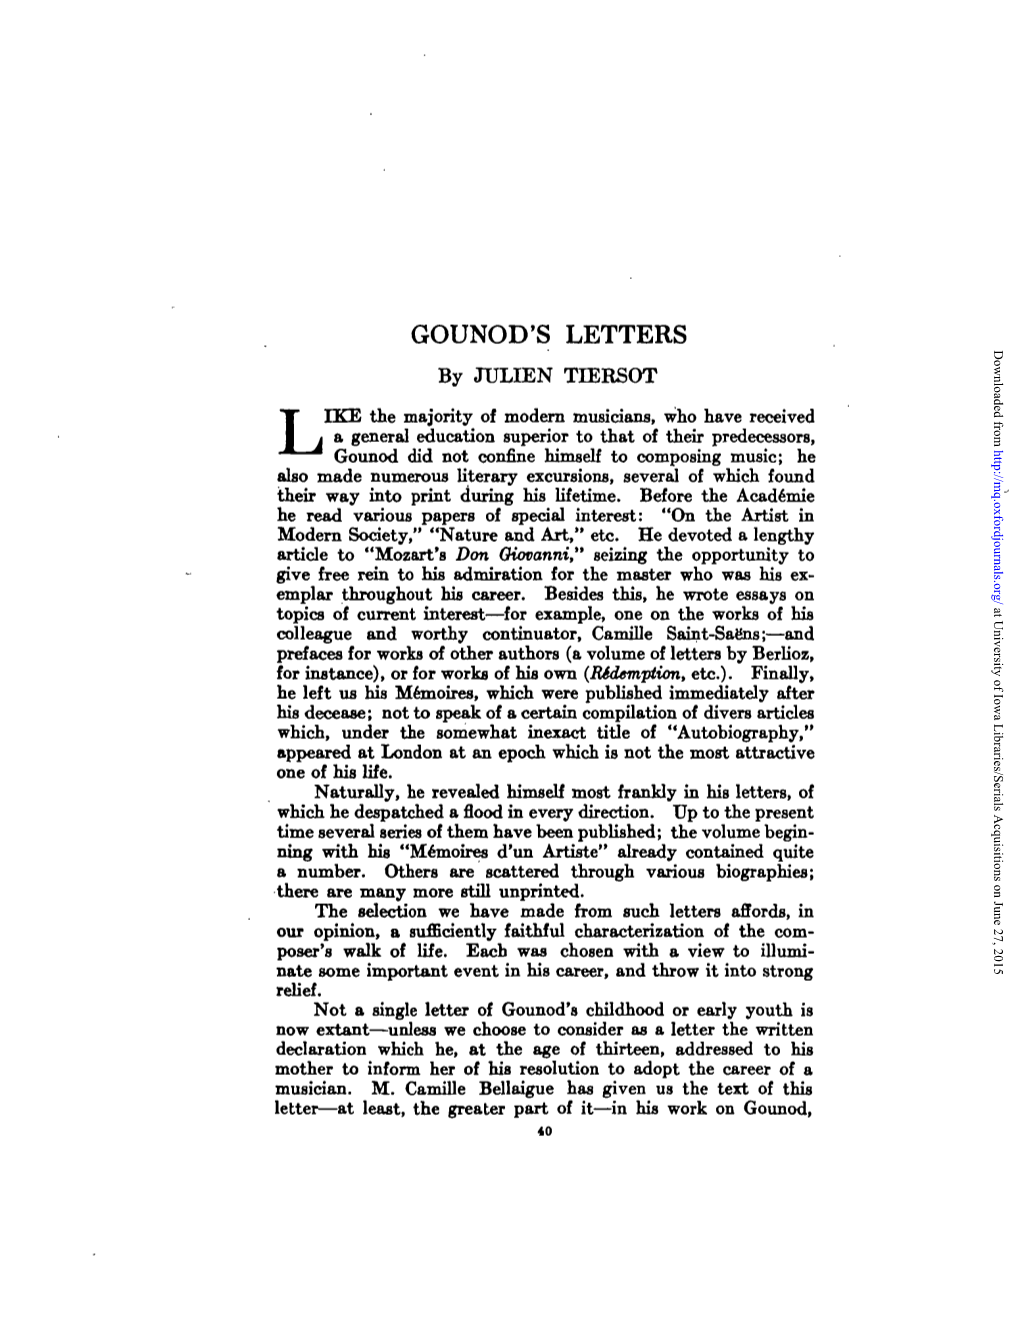 Gounod's Letters